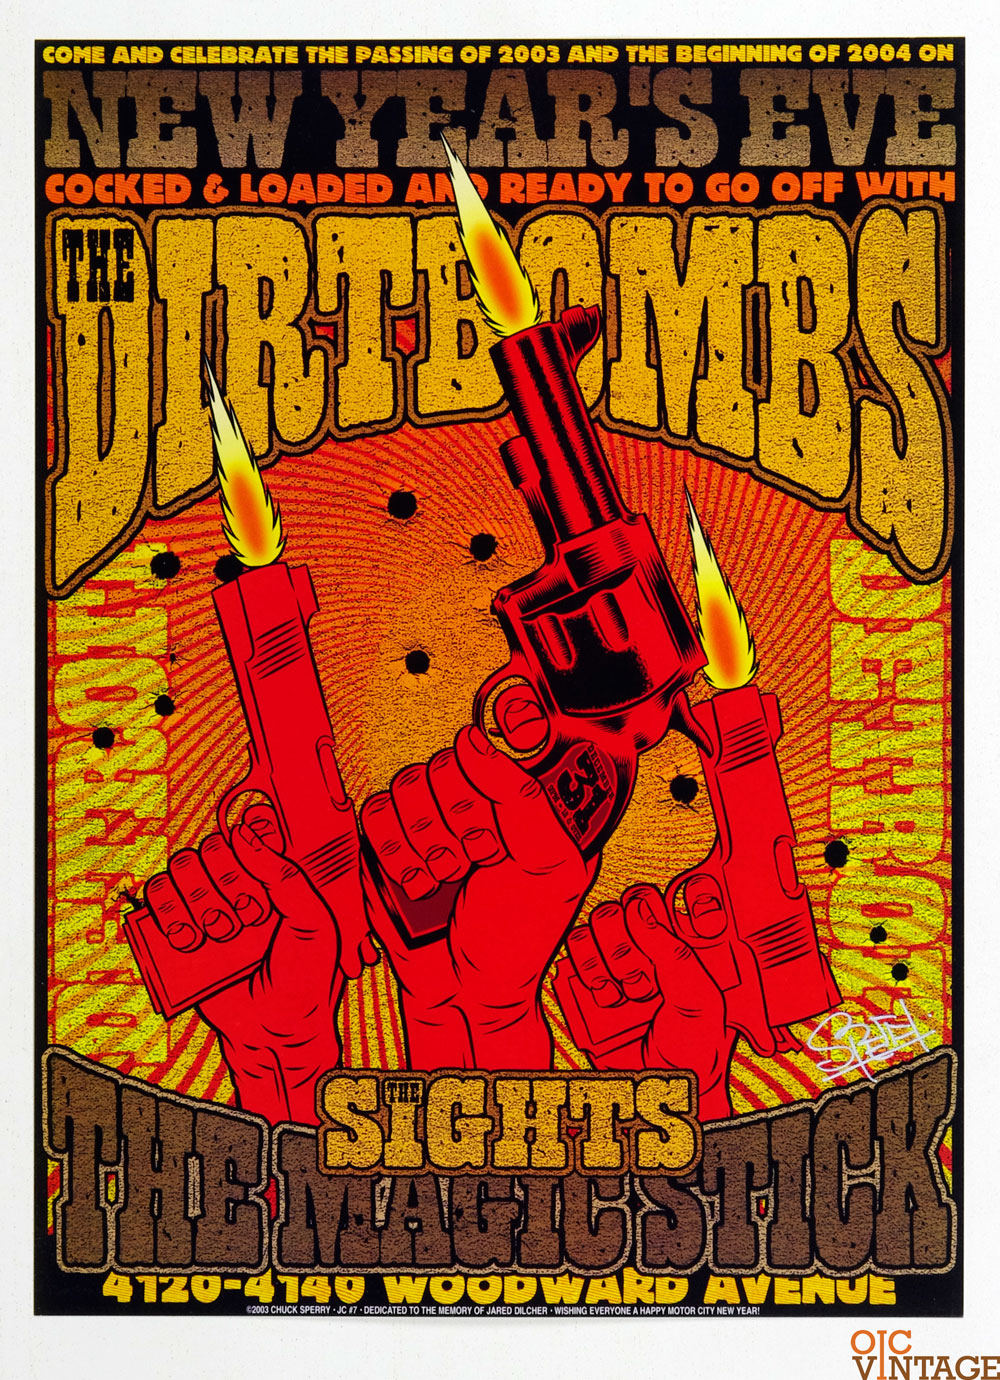 The Dirtbombs Poster 2003 Dec 31 New Year's Eve Magic Stick MI Chuck Sperry signed